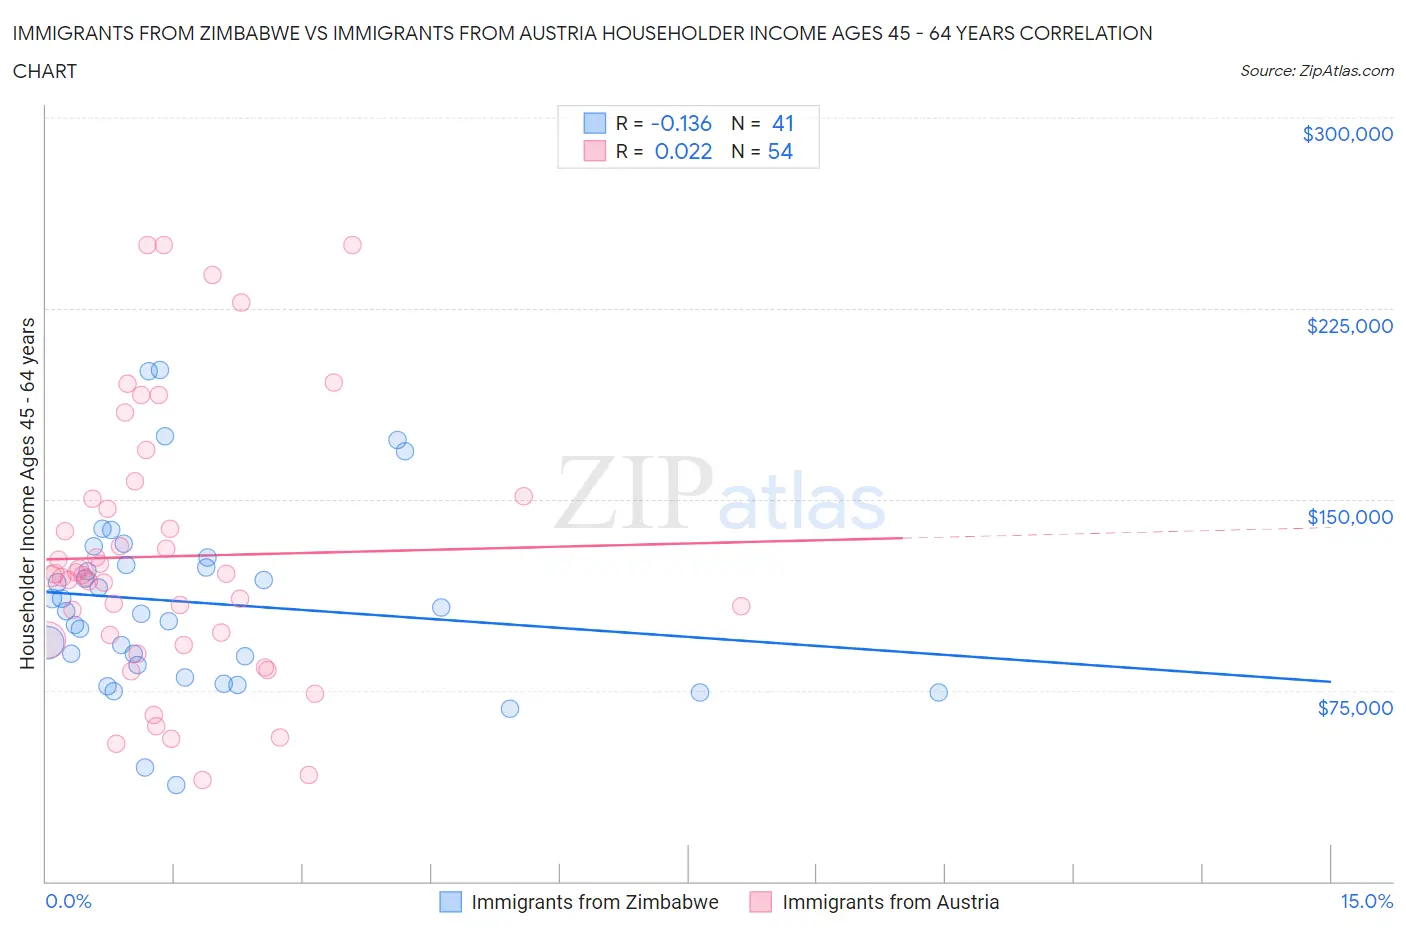 Immigrants from Zimbabwe vs Immigrants from Austria Householder Income Ages 45 - 64 years